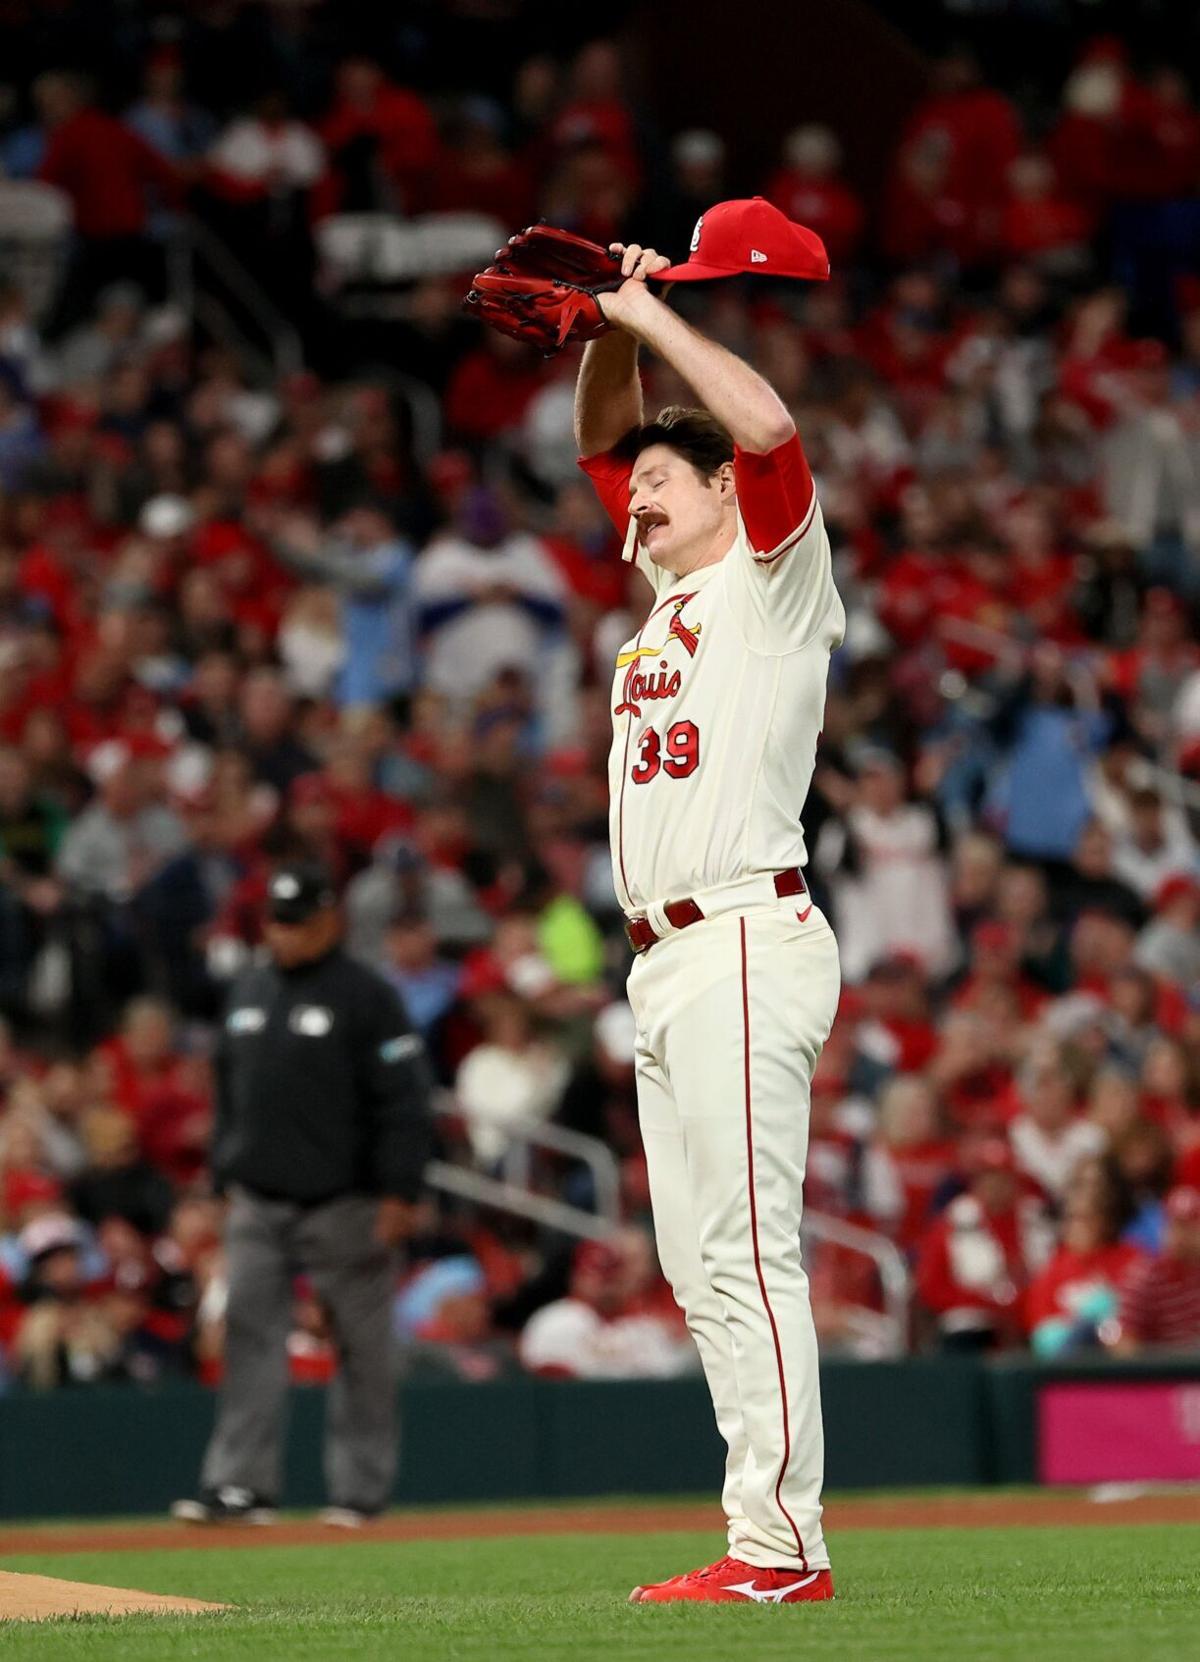 St. Louis Cardinals: Dreaming up what an XLB league would look like